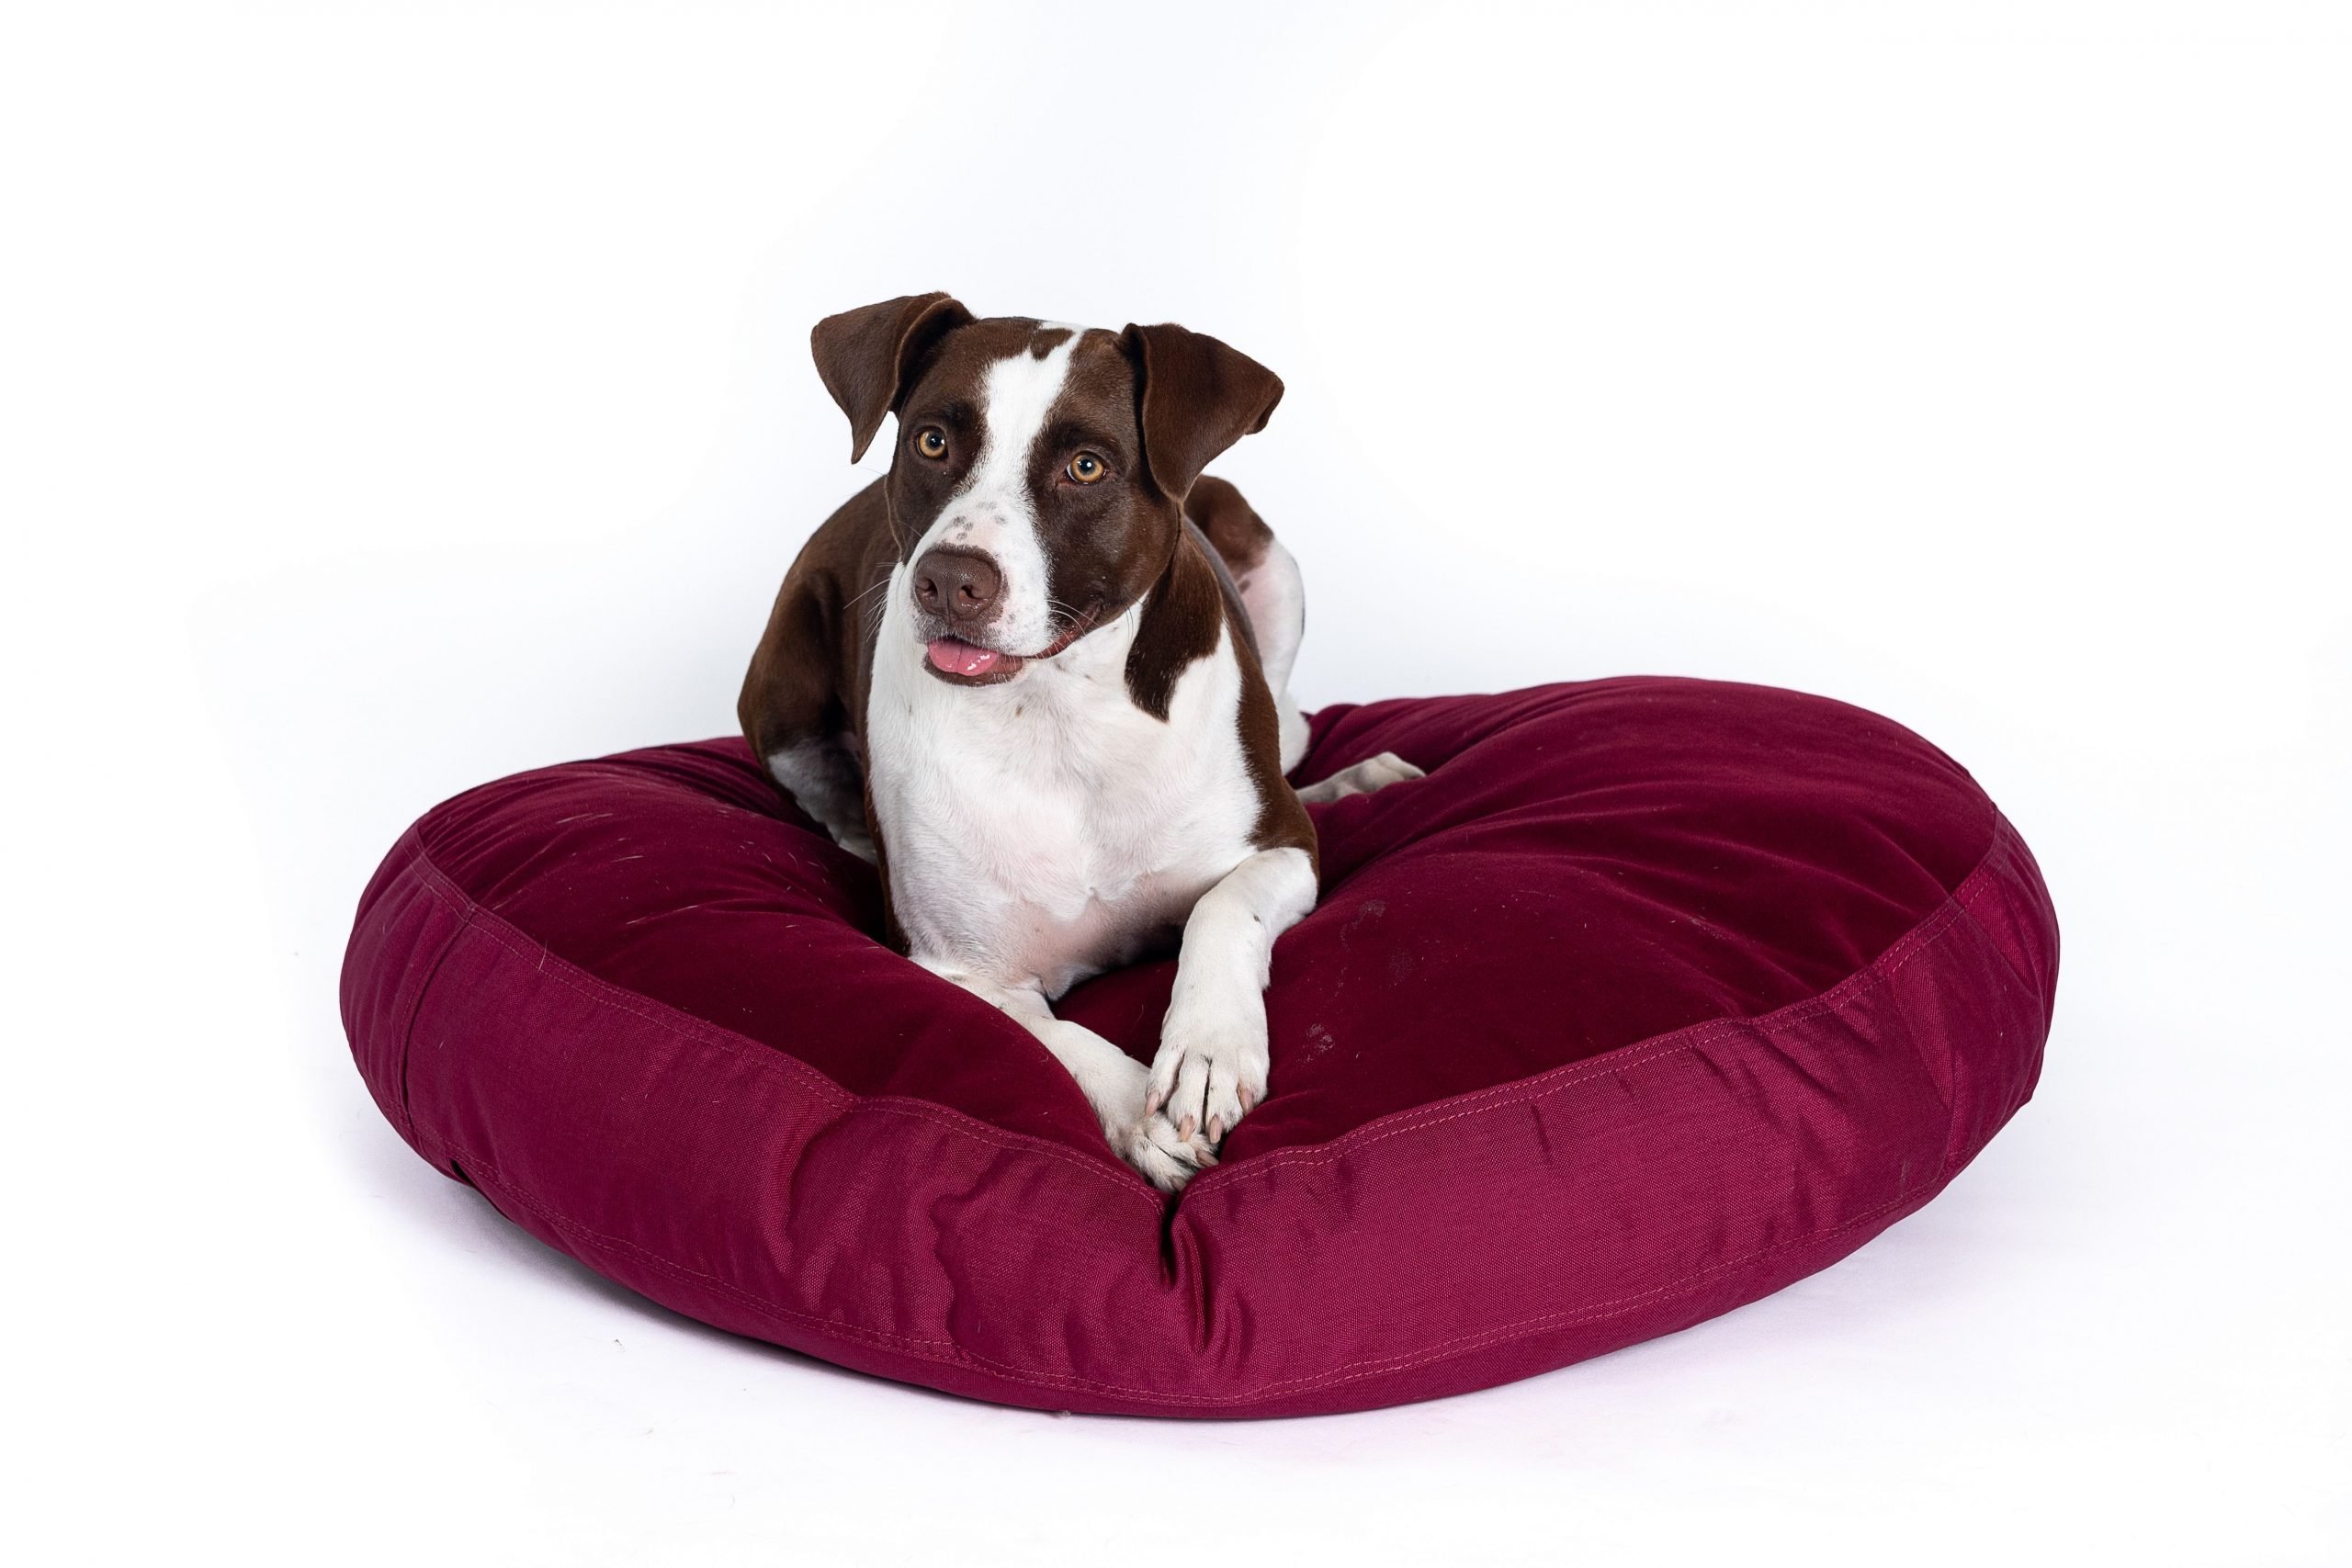 Chew Proof Elevated Dog Bed Cover, Durable and Breathable